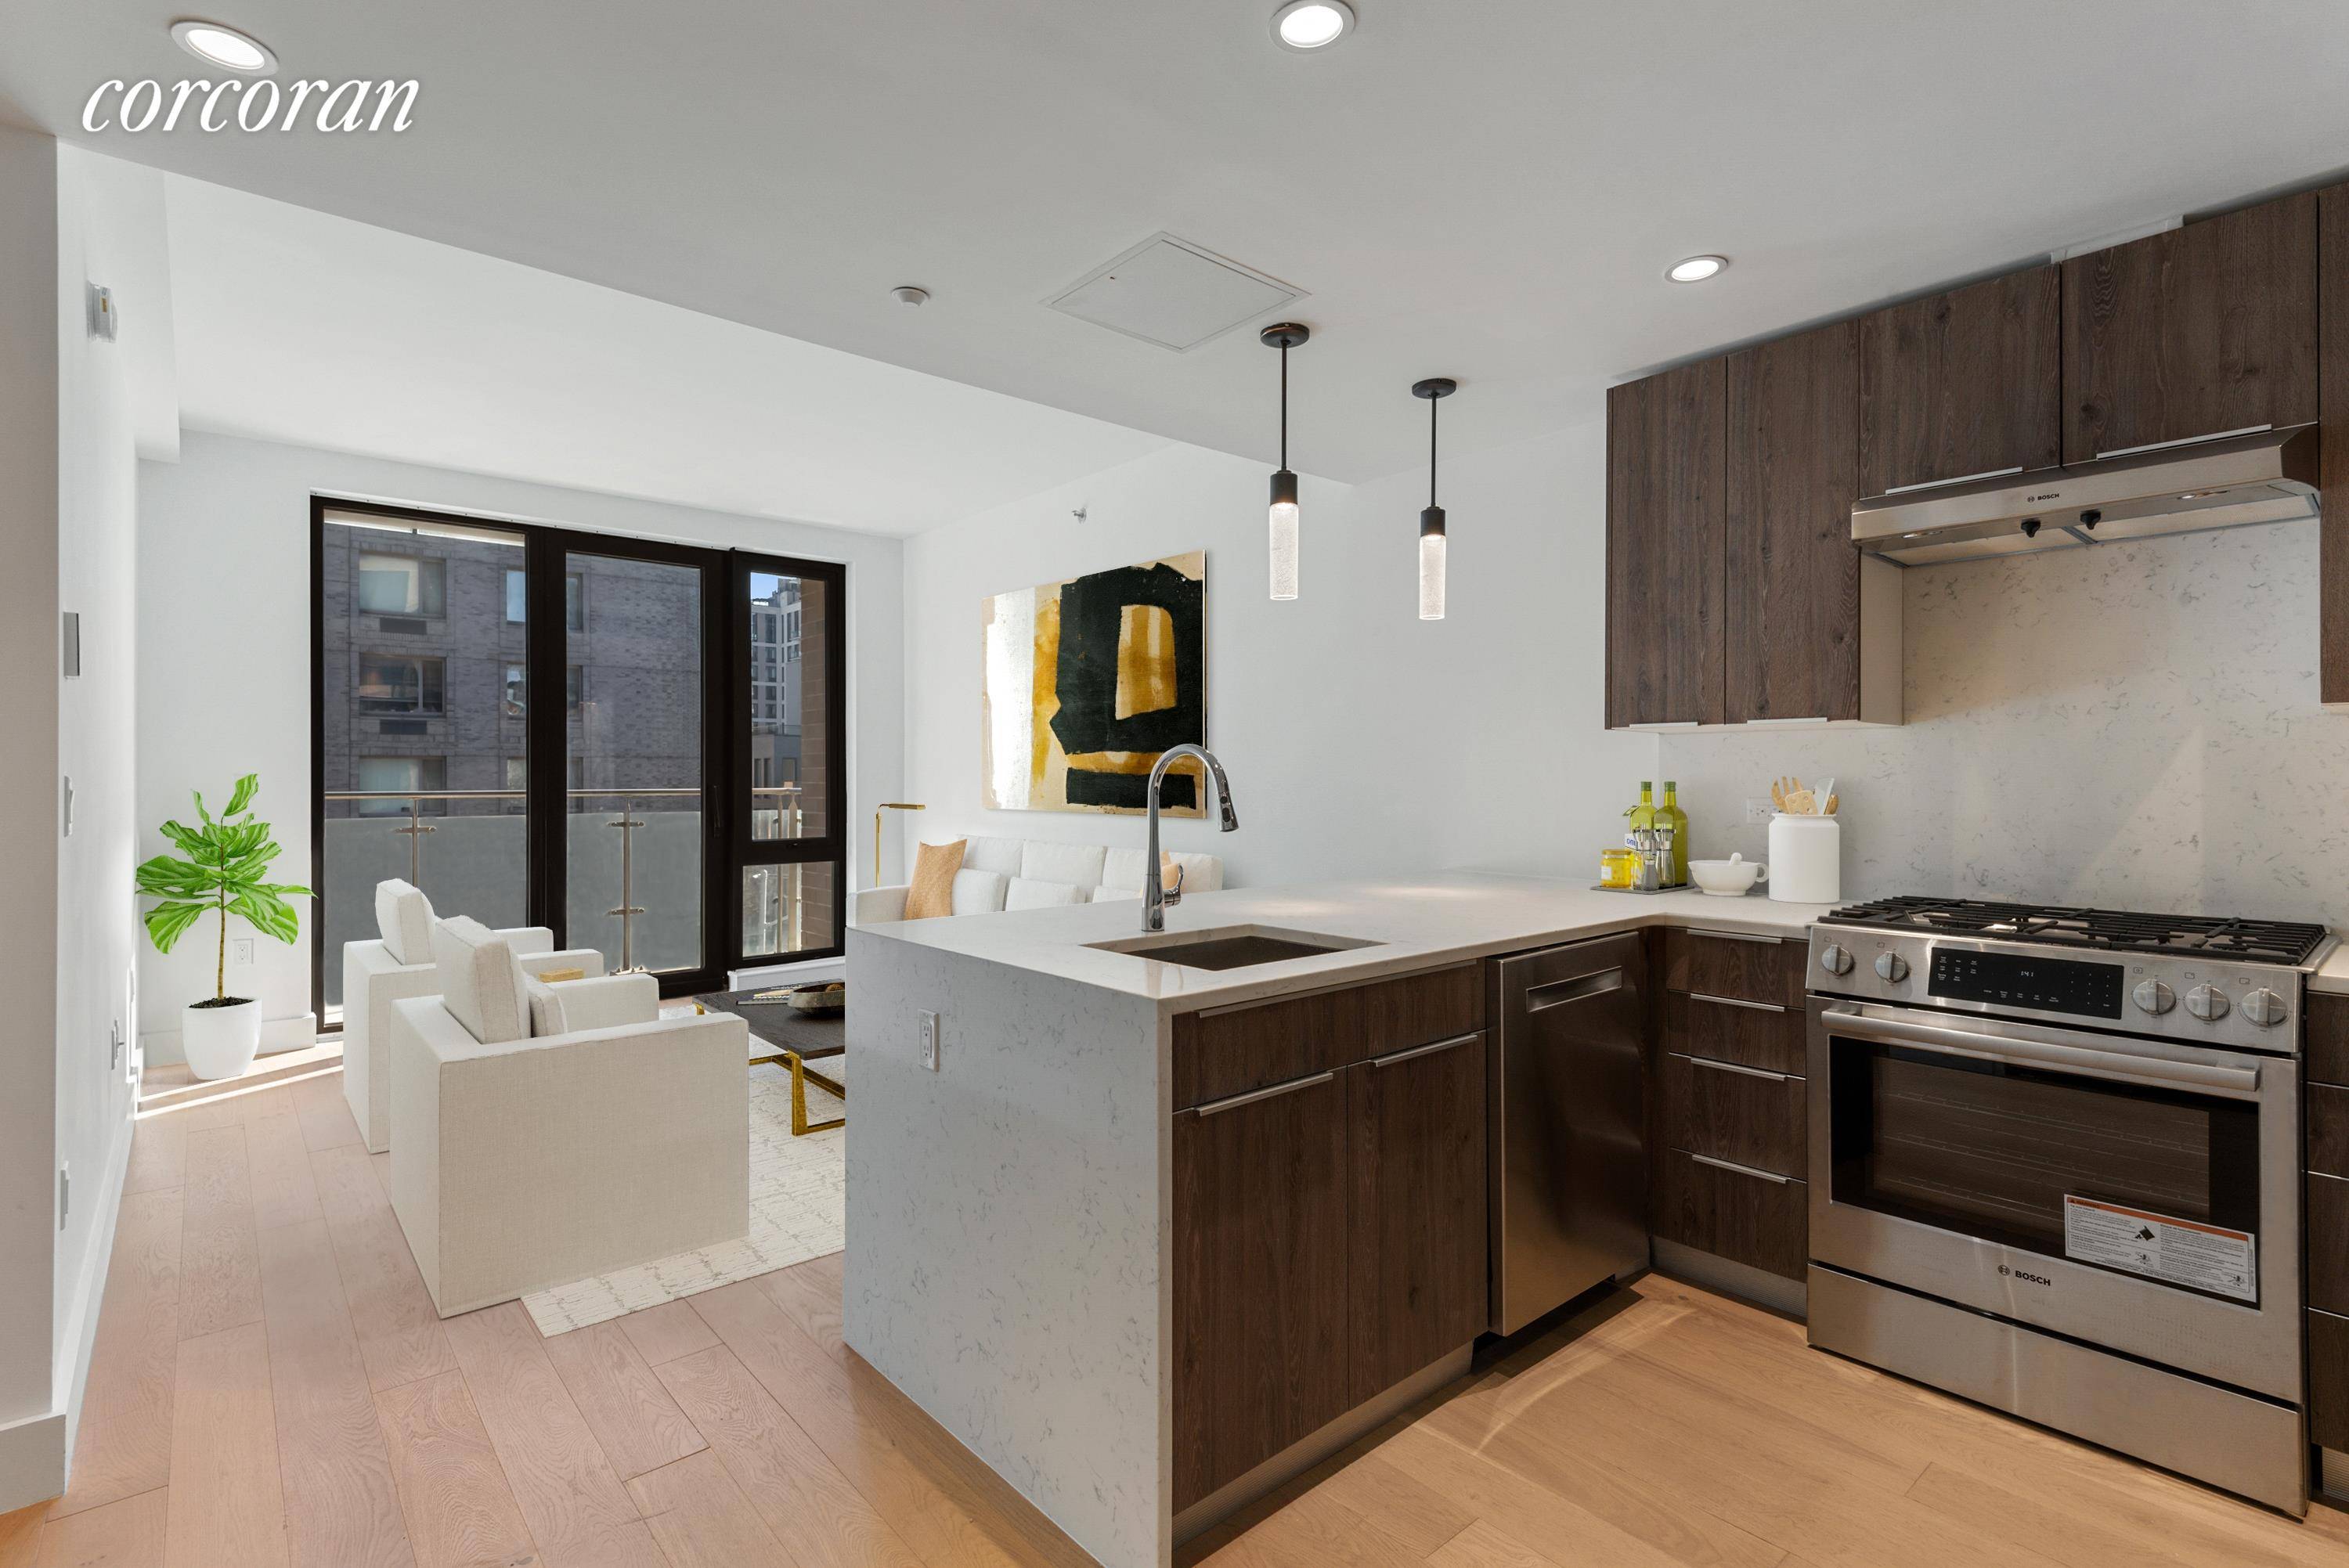 Residence 3E at The Bond, Long Island City, is a coveted east facing one bedroom, one bath unit with 620 interior square feet and a large balcony.